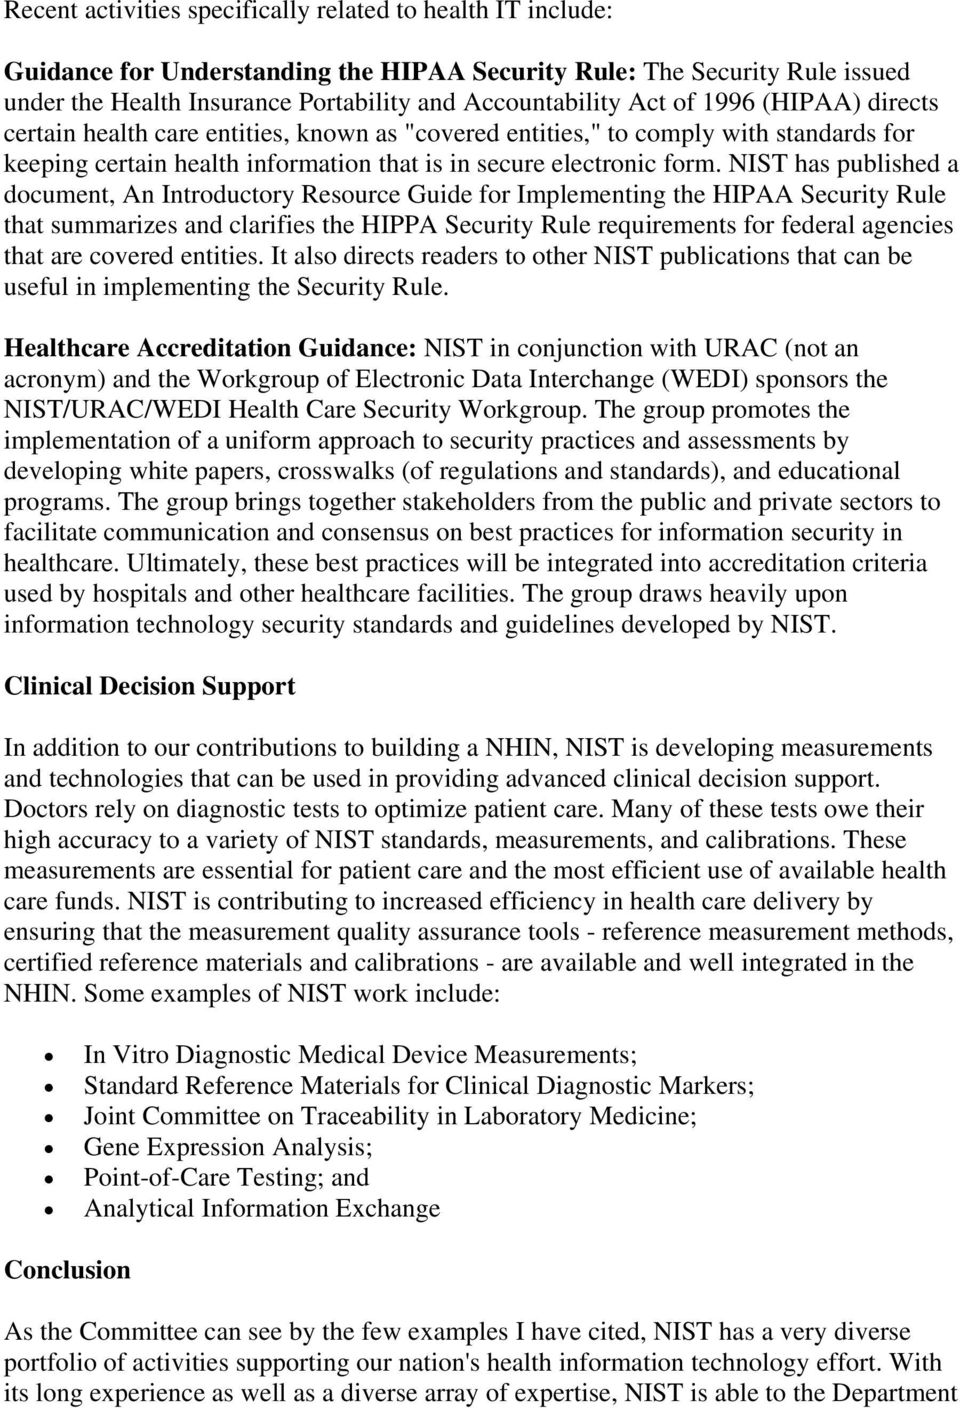 NIST has published a document, An Introductory Resource Guide for Implementing the HIPAA Security Rule that summarizes and clarifies the HIPPA Security Rule requirements for federal agencies that are